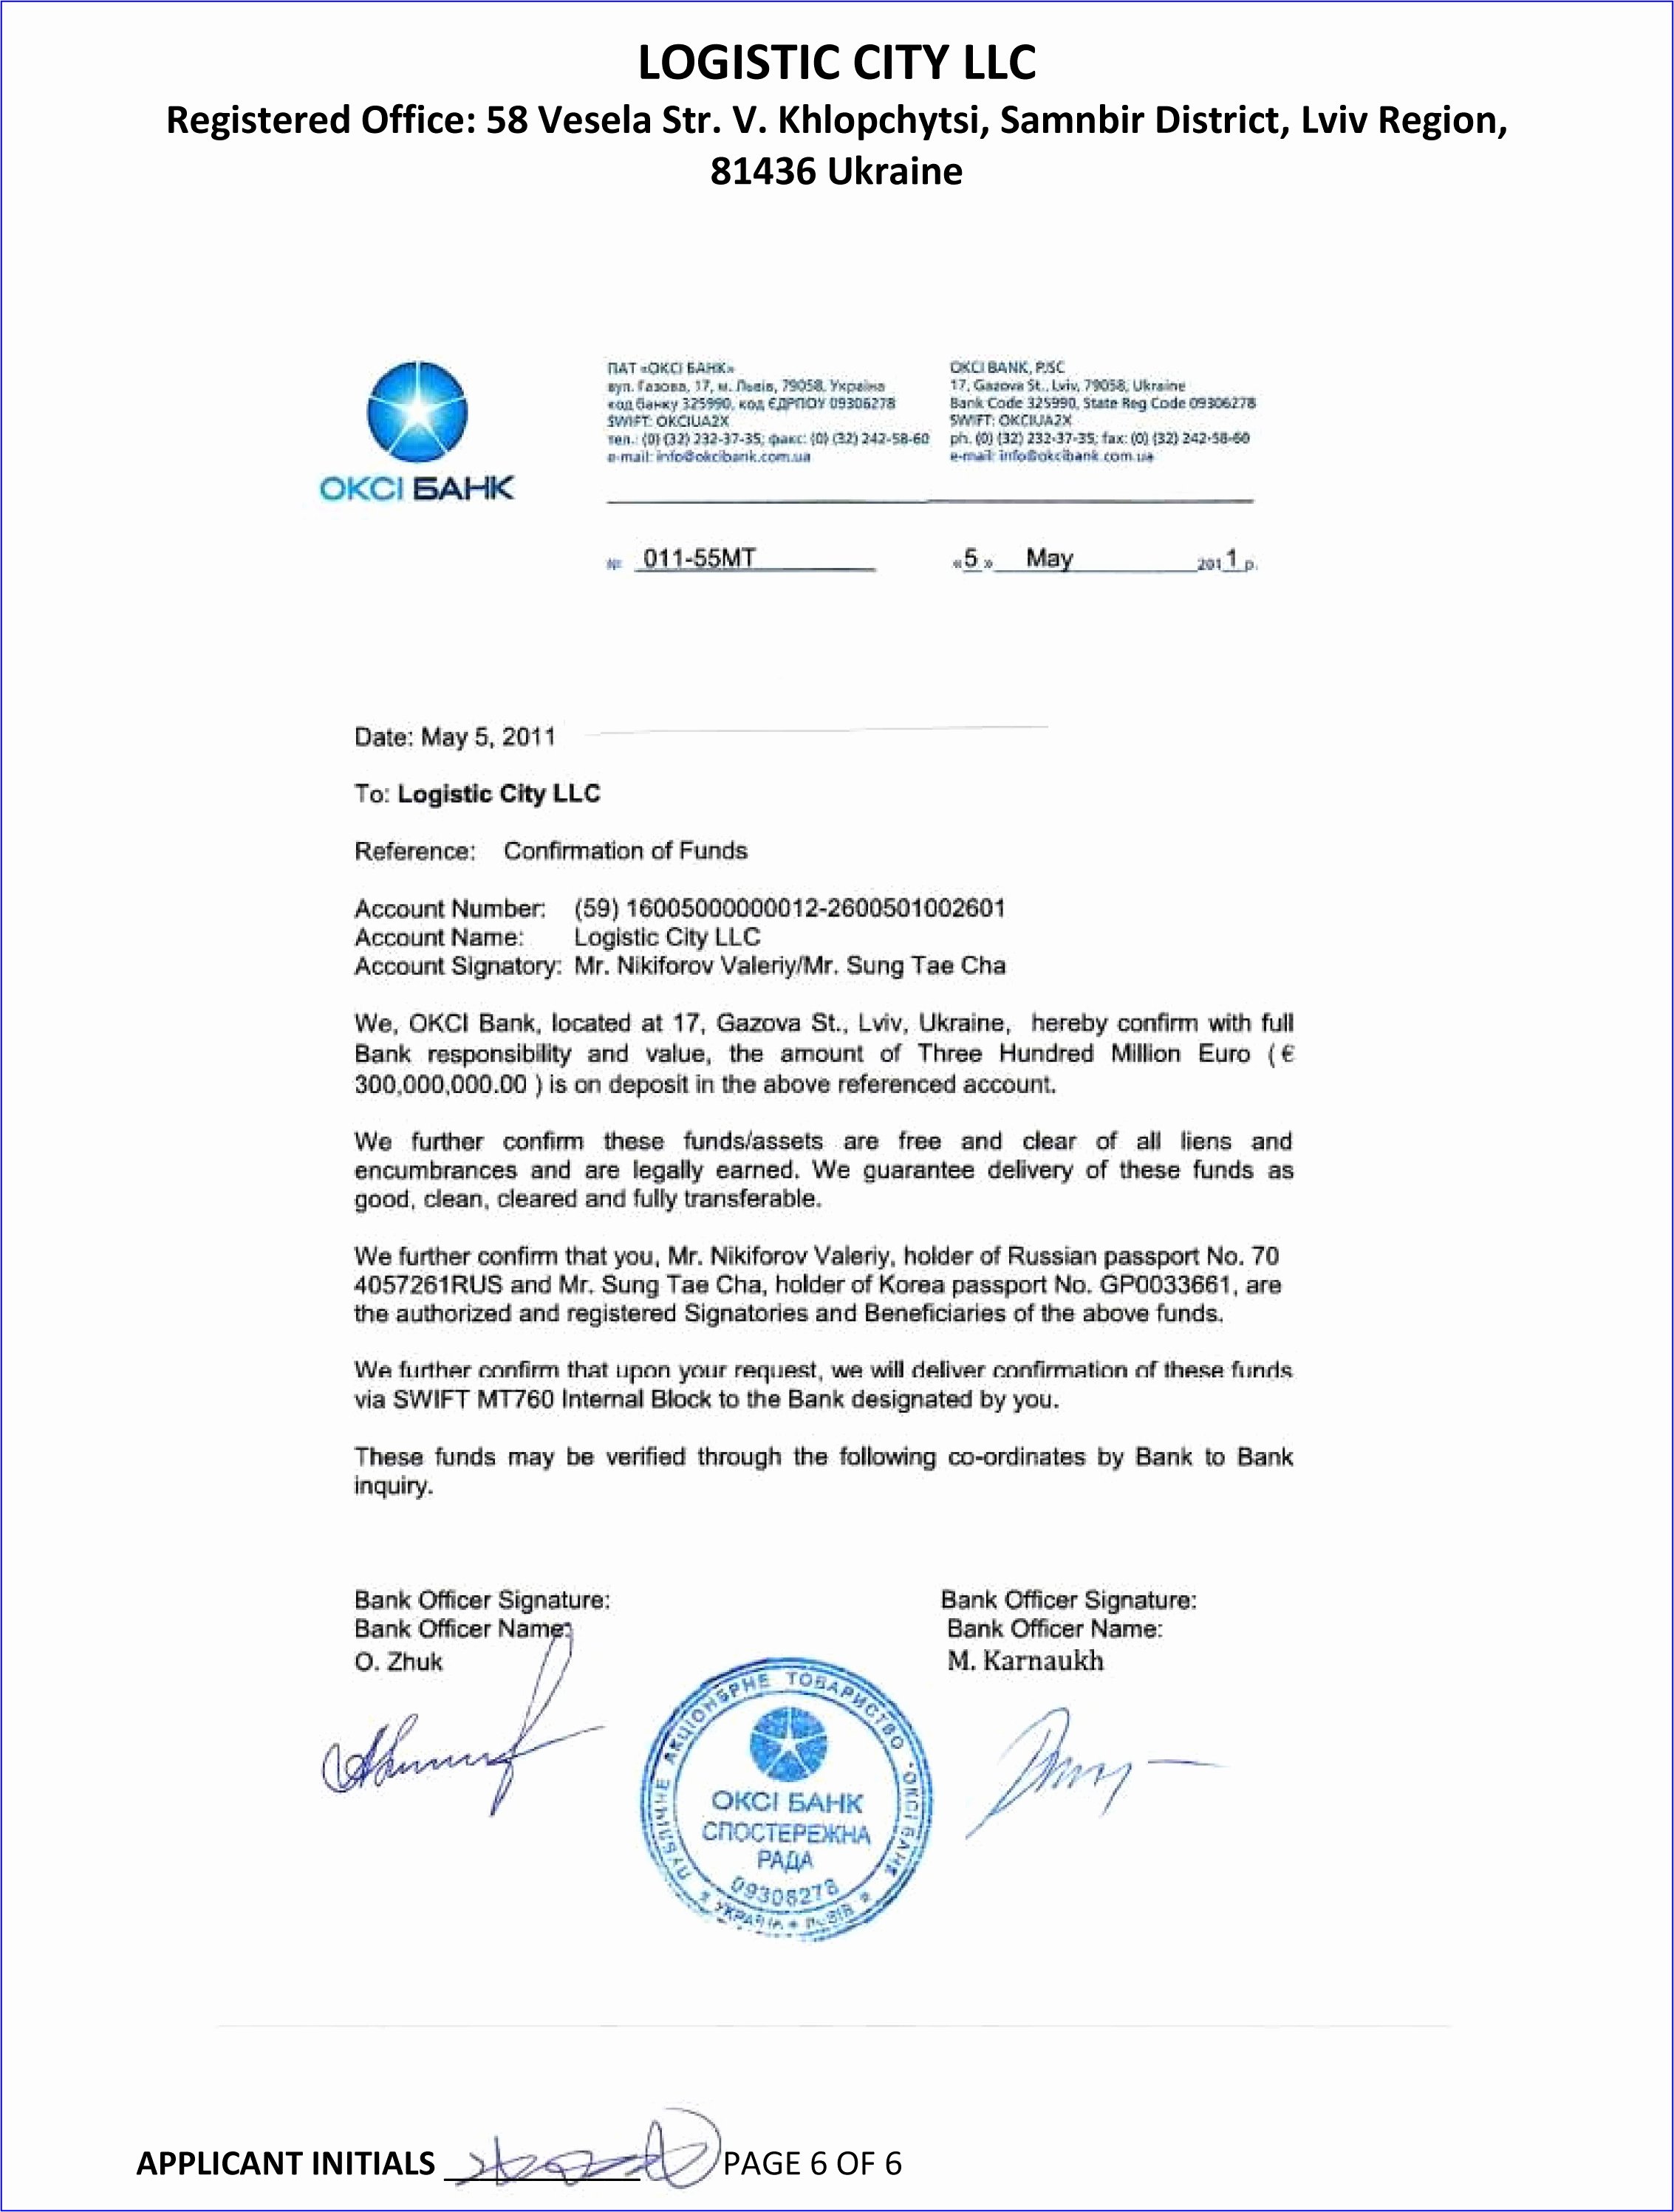 Source Of Funds Letter Template Best Of 2011 300m Okci Bank Confirmation Of Funds Letter to